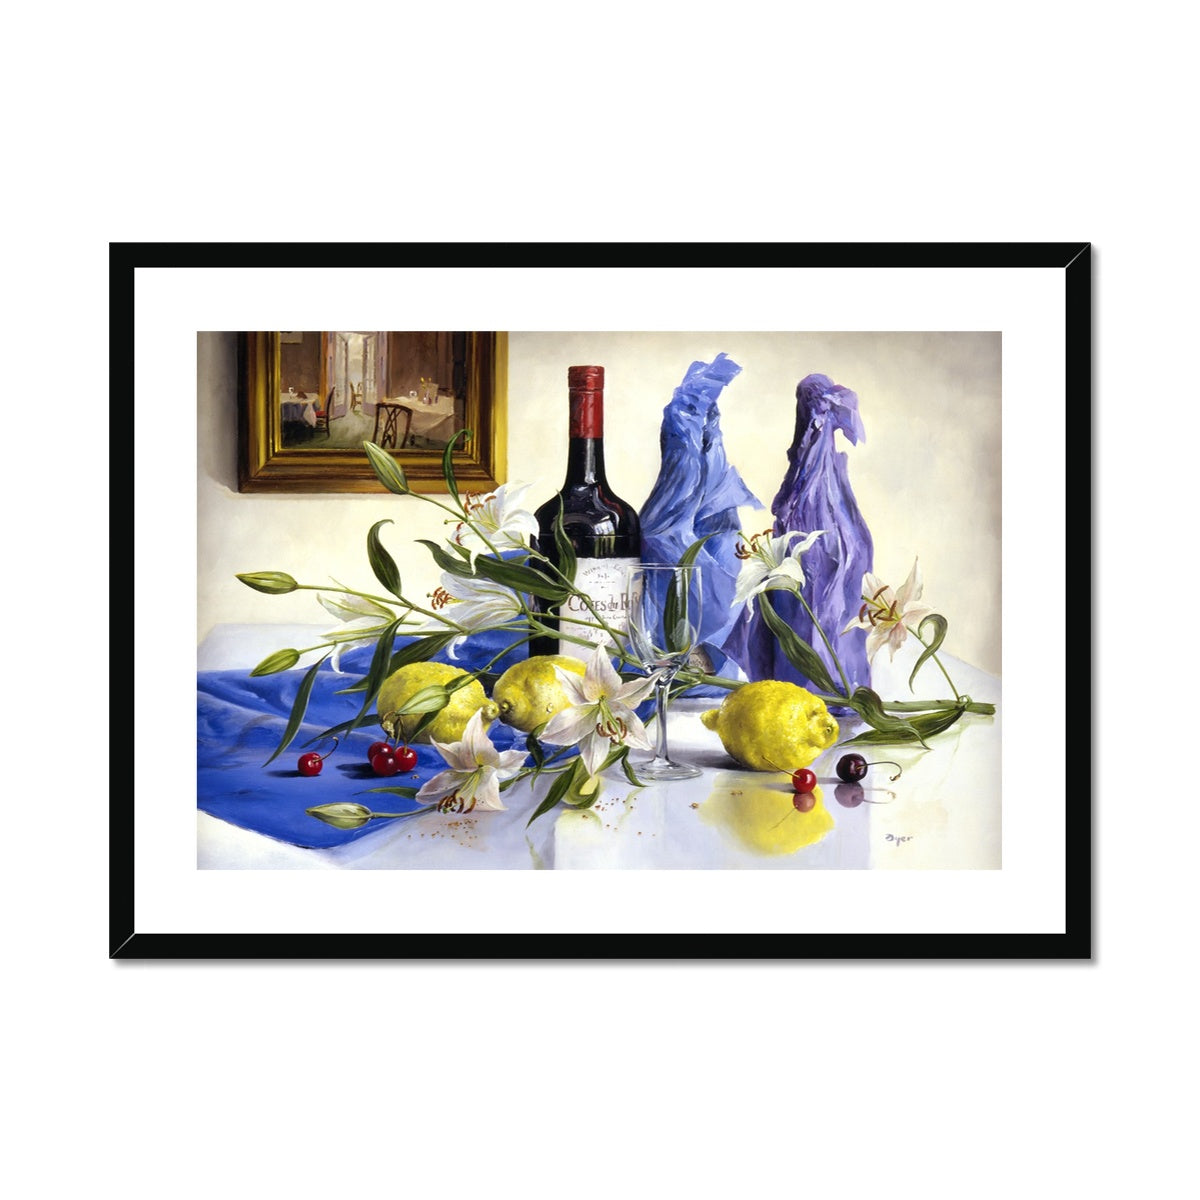 Ted Dyer Framed Open Edition Cornish Fine Art Print. 'White Lilies, Lemons and Red Wine Still Life'. Cornwall Art Gallery